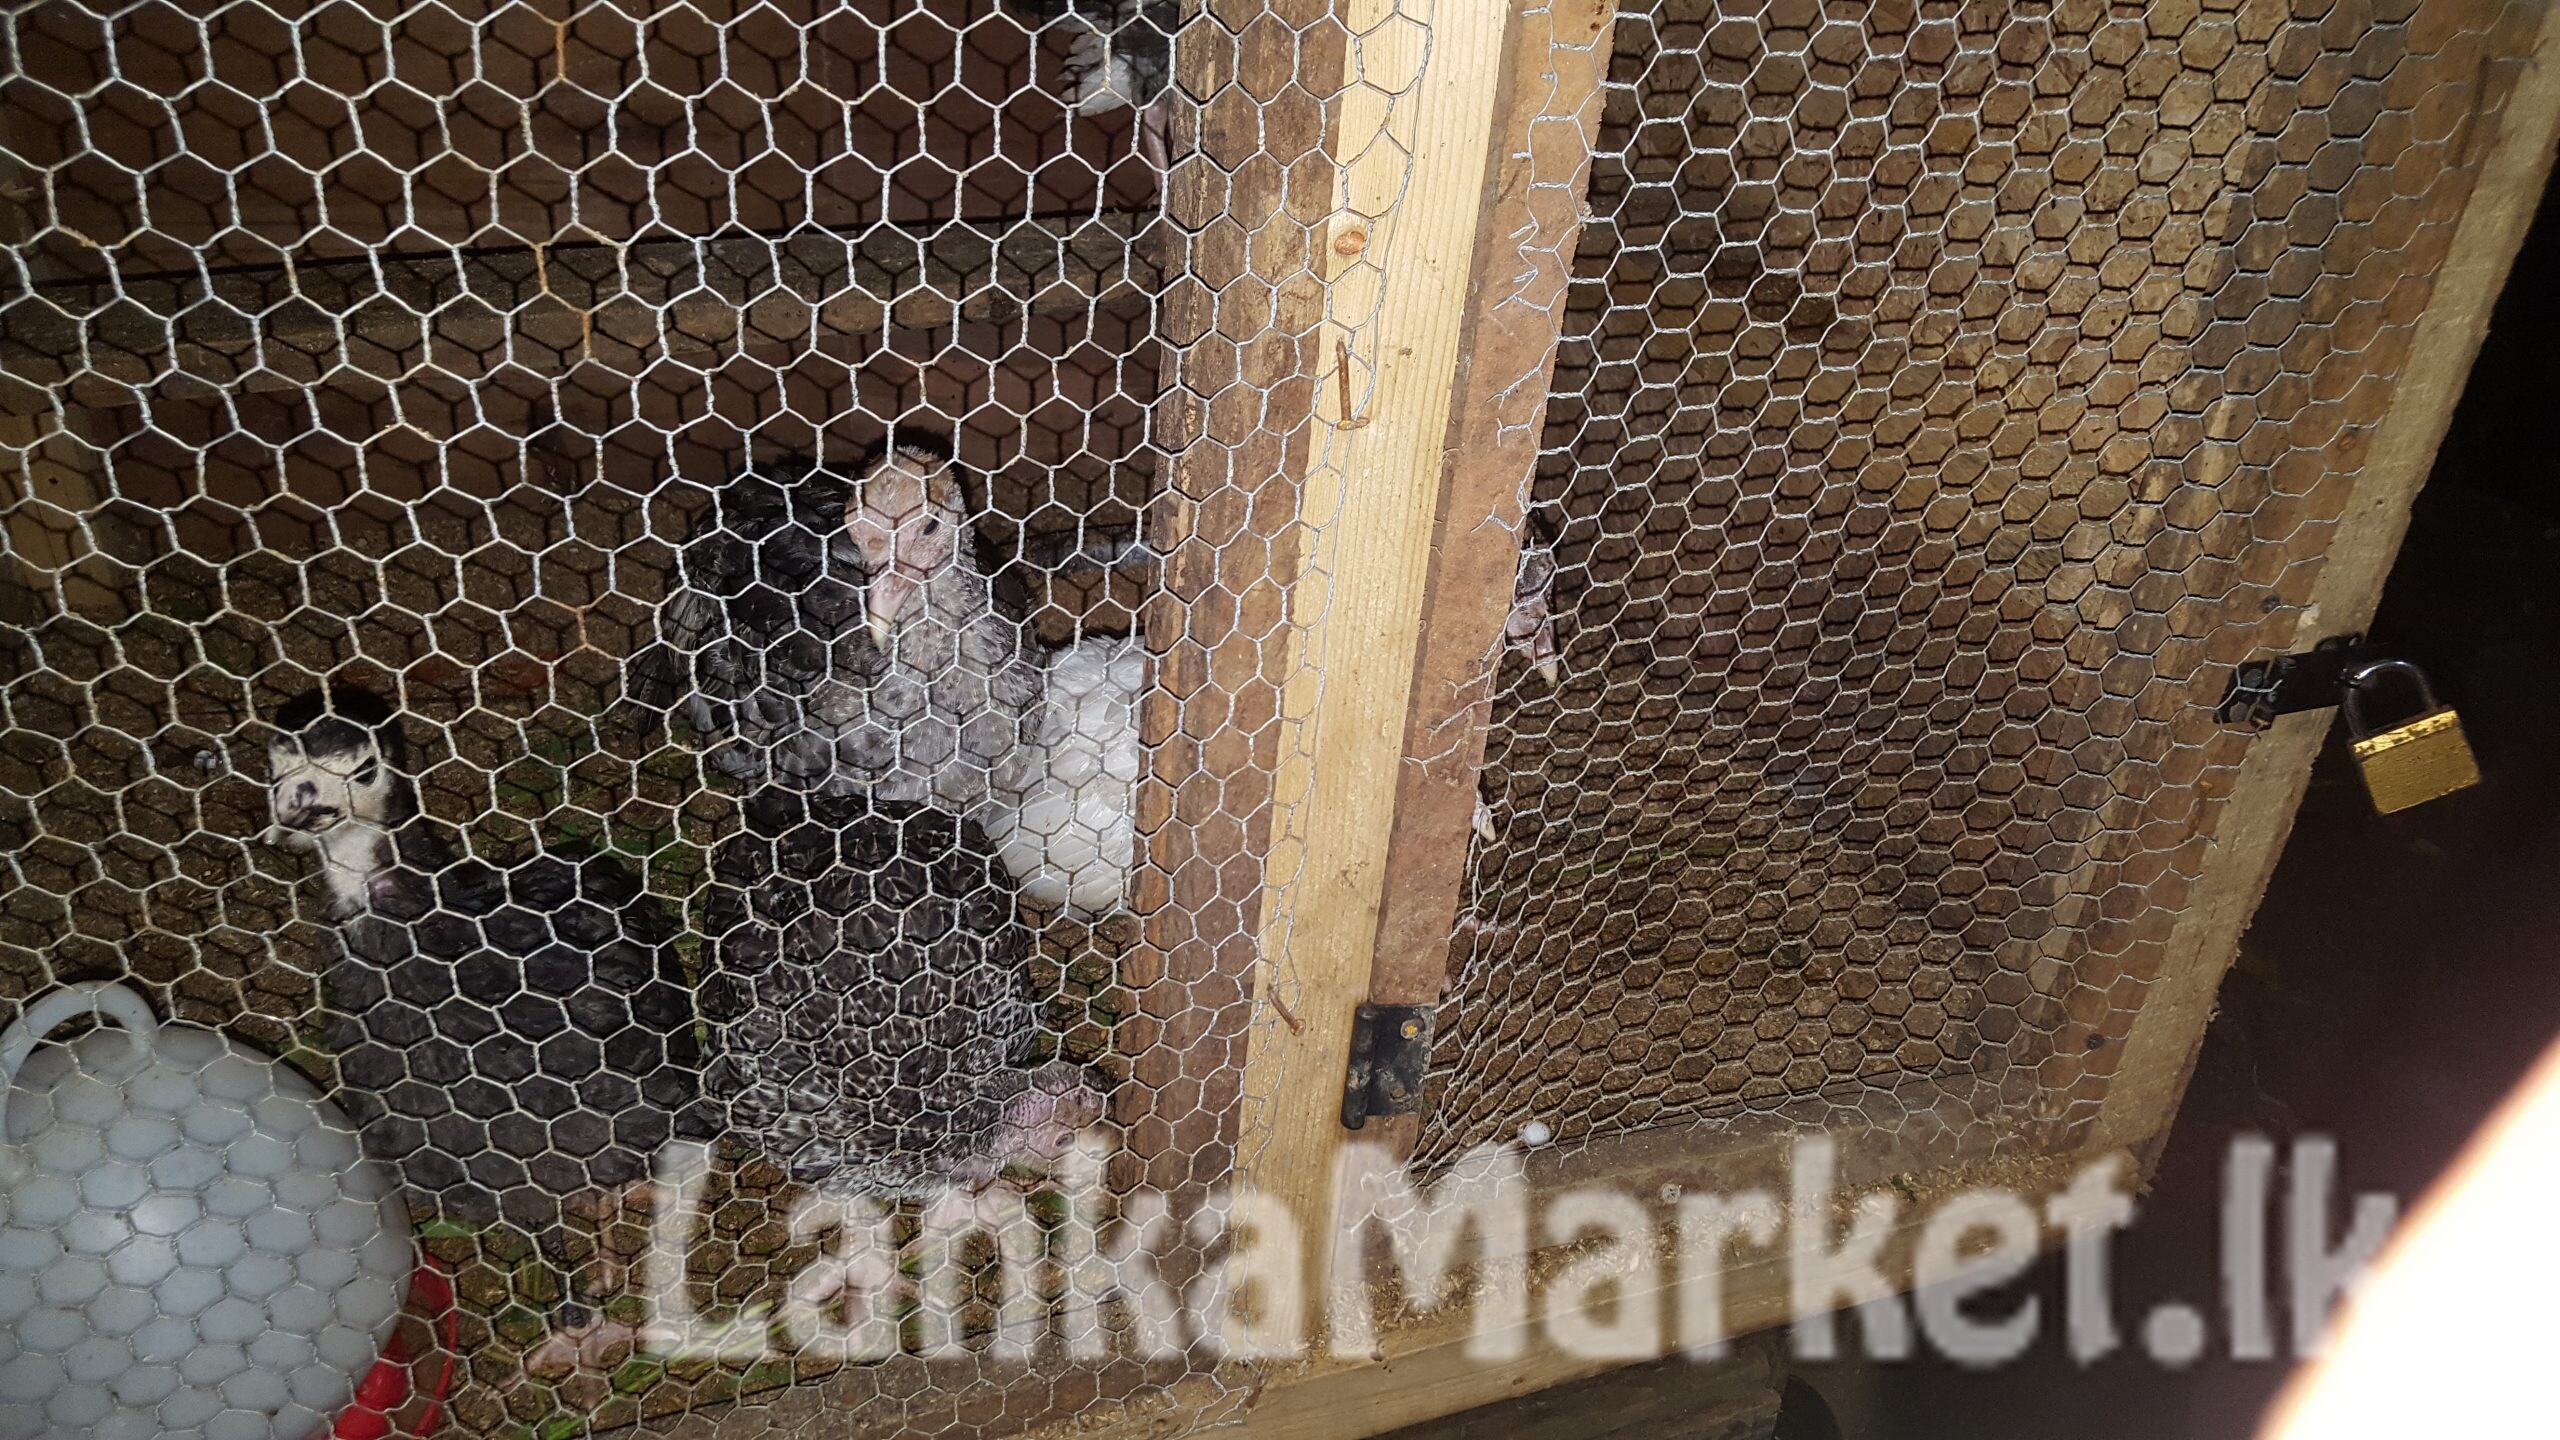 GANGKUKULLU FOR SALE Turuky Chicken if you want more about please contect me on 0788290989 01 pices price 2000/= If you like buy all get 01 chick free Colers ~whait,black,Dark Gray …….